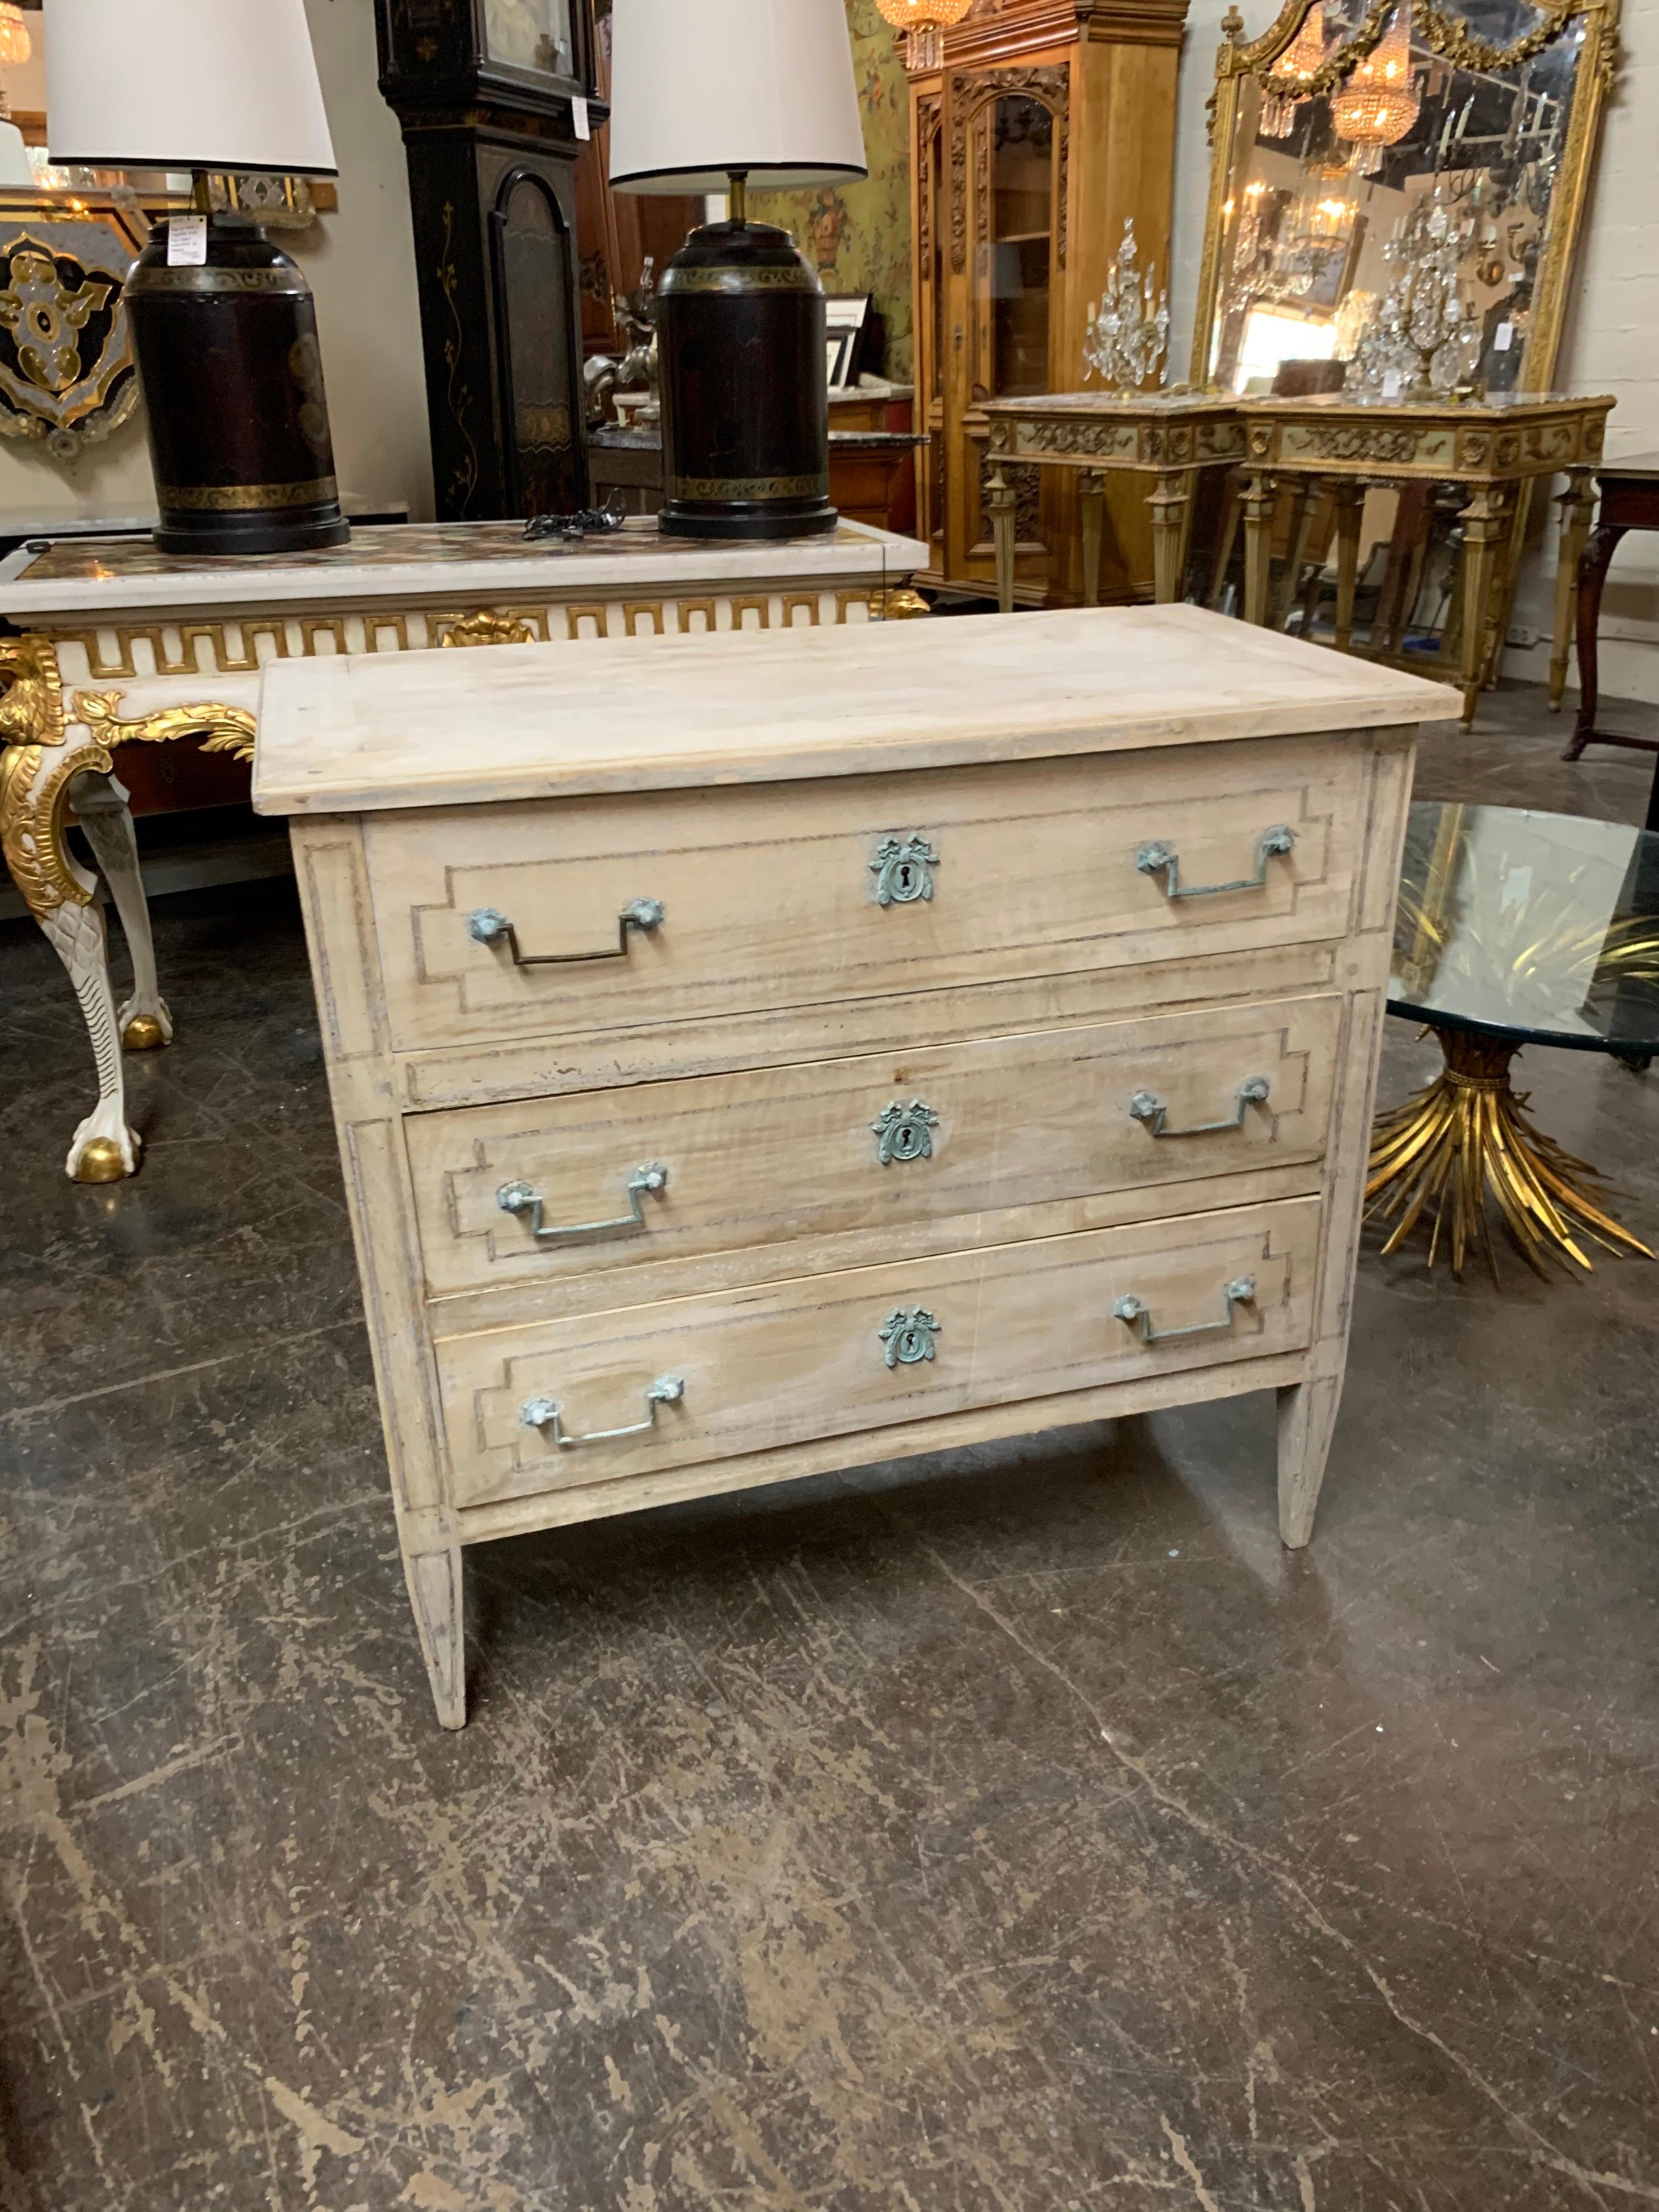 Very fine 19th century Italian bleached walnut chest of drawers. The piece has inlaid details on the drawers and the top. Great for the modern farmhouse look!